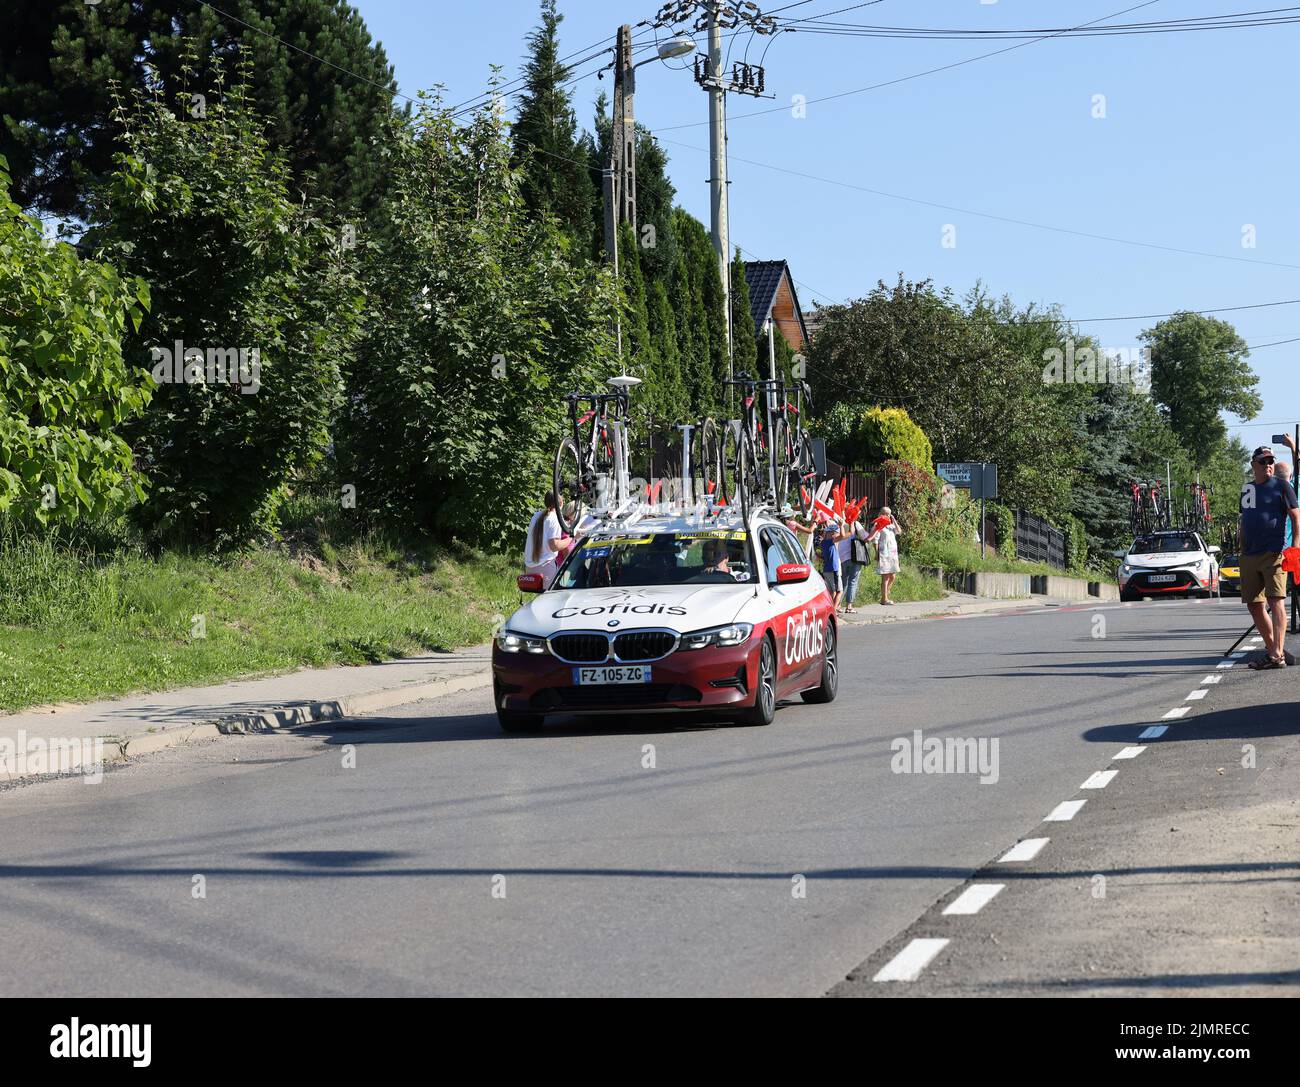 Krakow, Poland - August 5, 2022:  Cofidis Team vehicle on the route of Tour de Pologne UCI – World Tour, stage 7 Skawina - Krakow. The biggest cycling event in Eastern Europe. Stock Photo